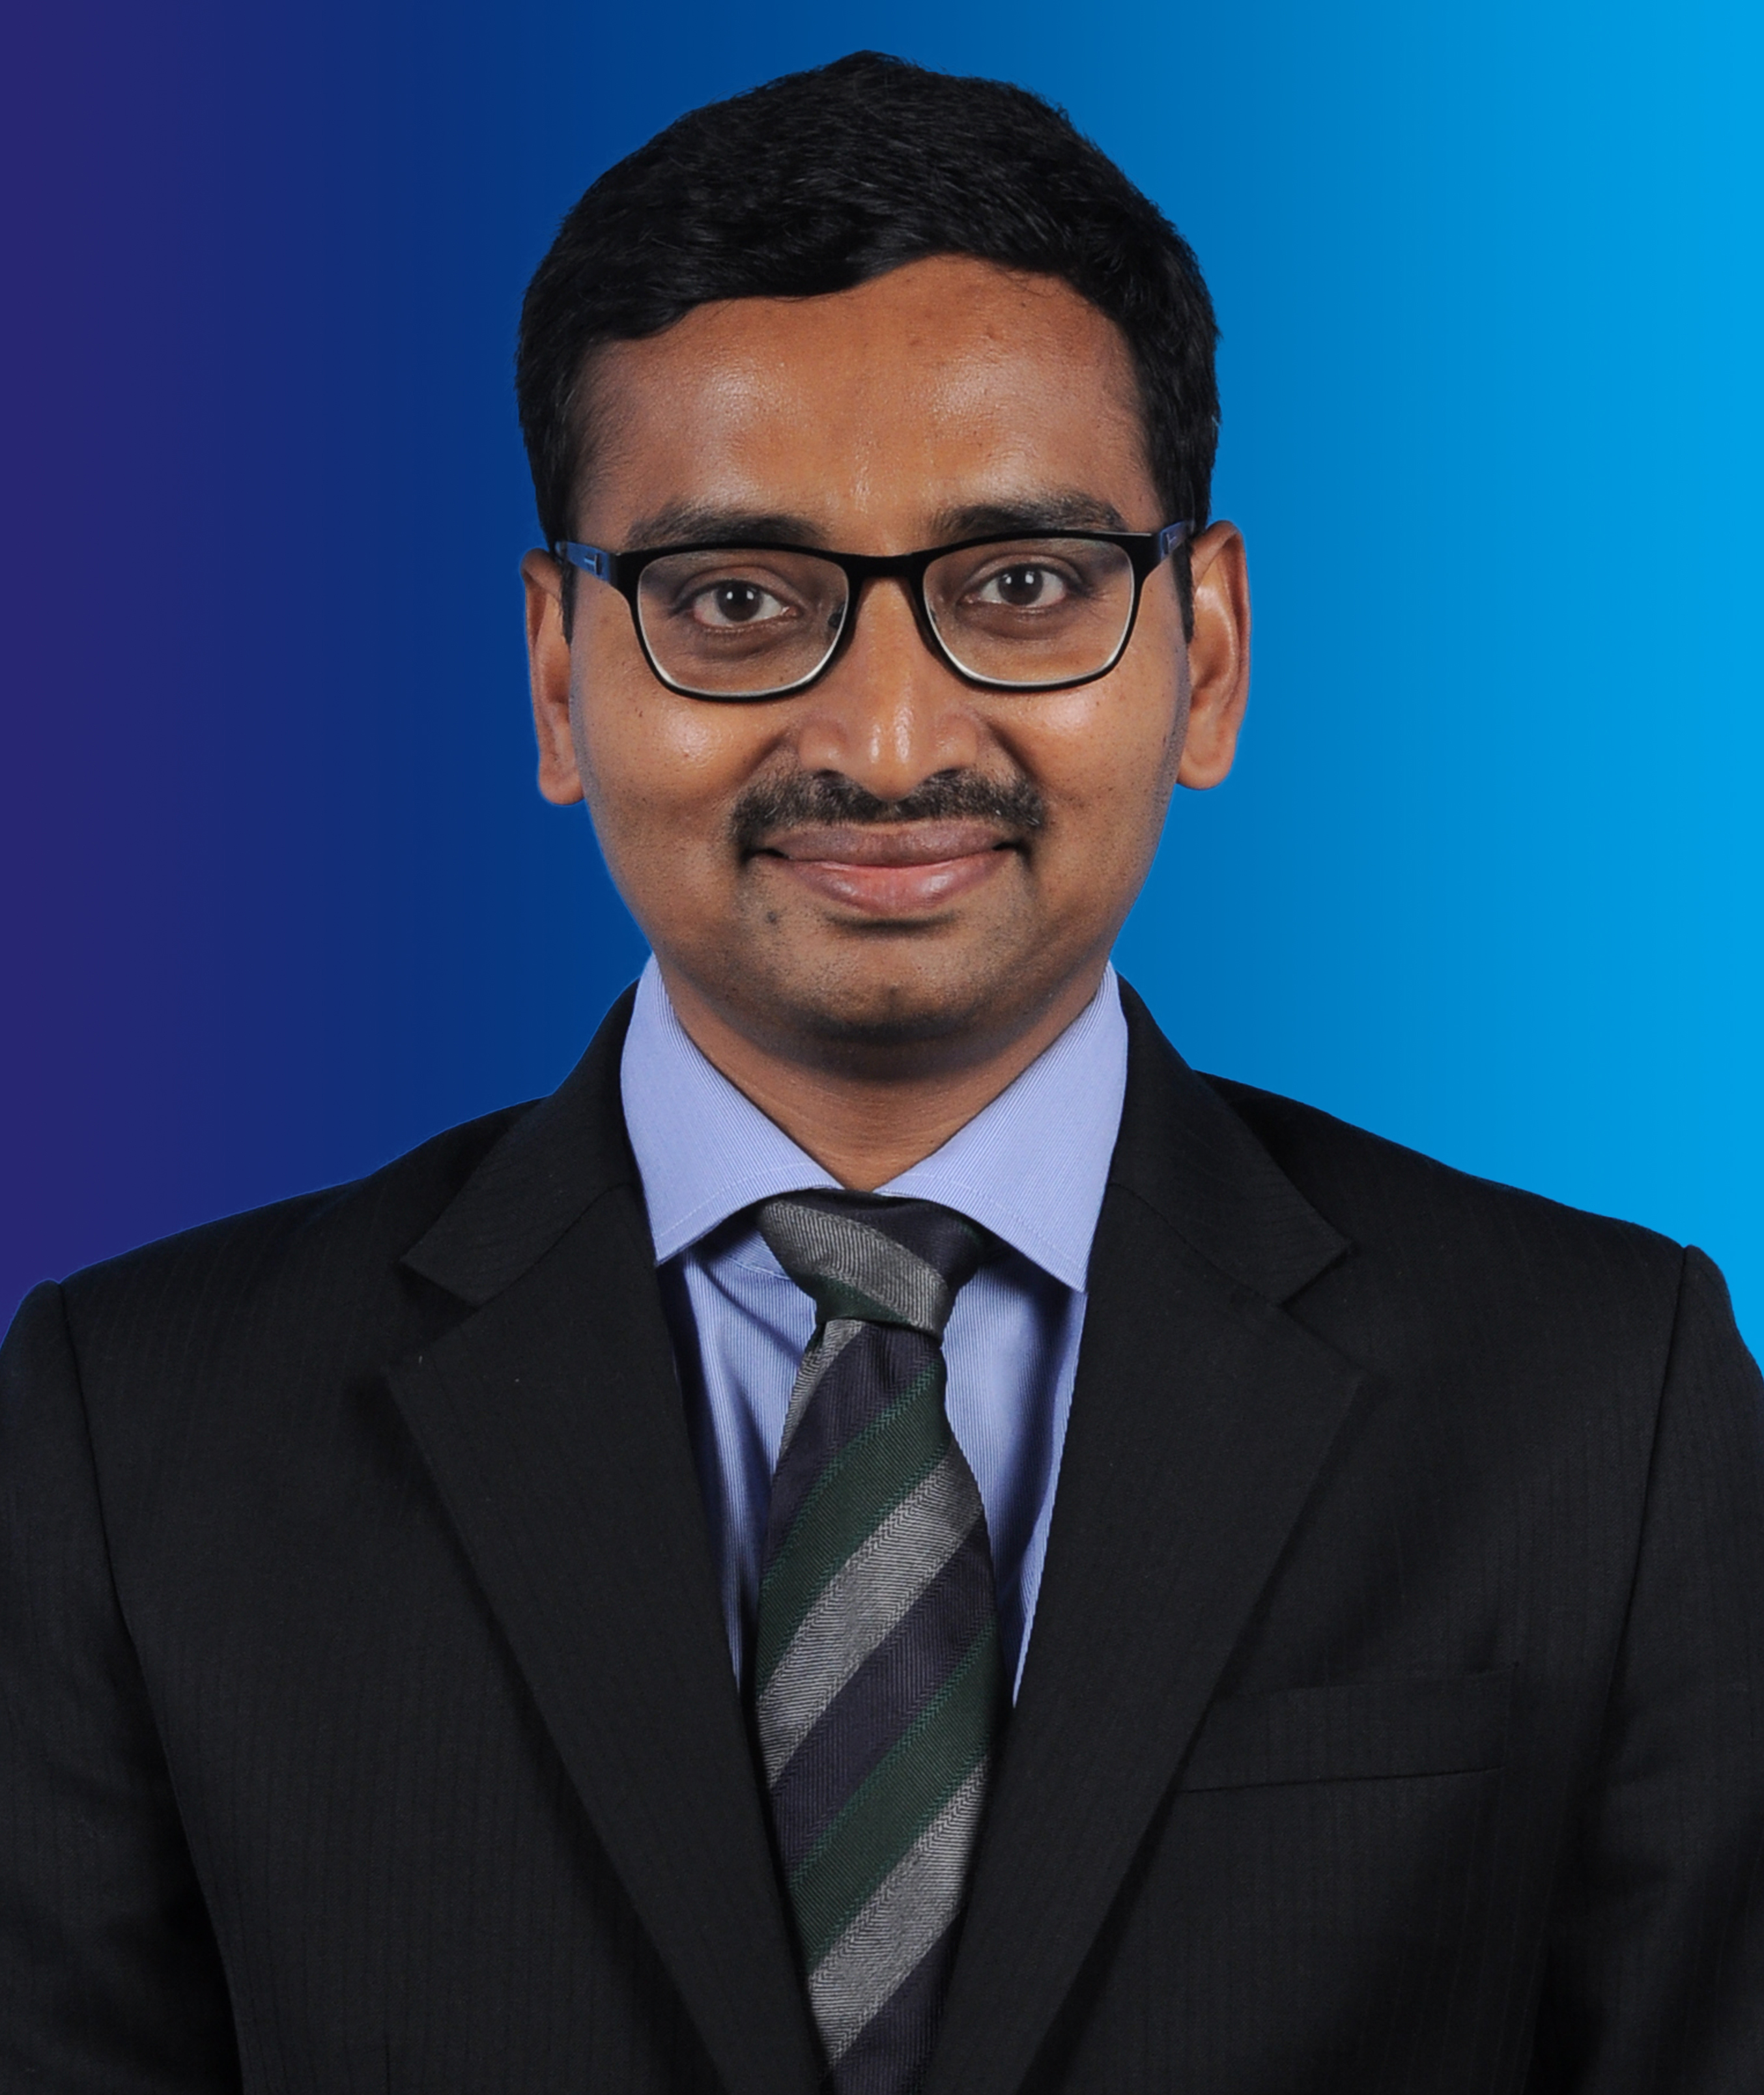 Anish De, <span>Partner and National Head - Energy Natural Resources & Chemicals, KPMG</span>